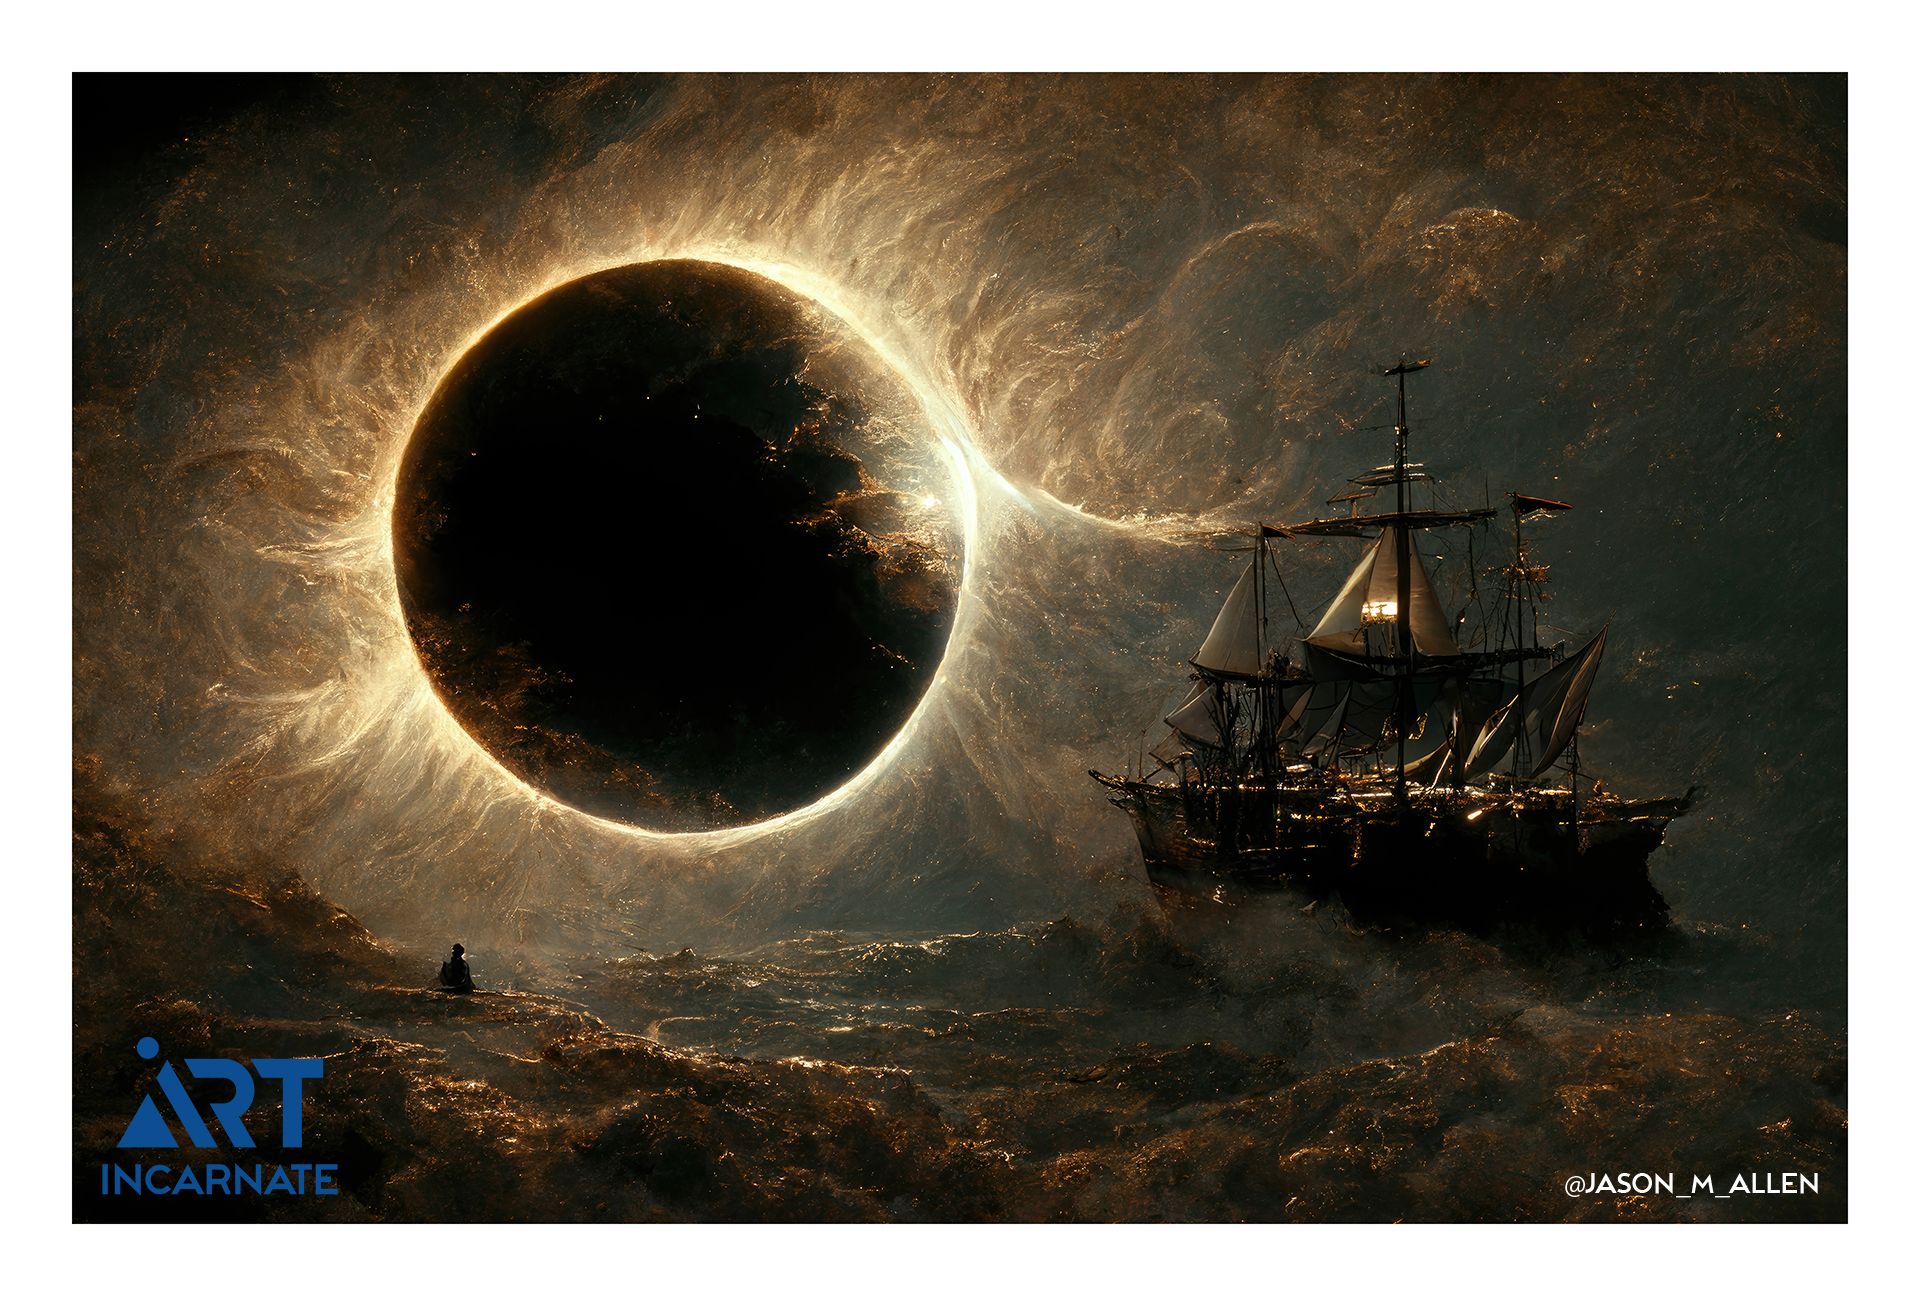 An art project showing an eclipsed sun with flares all around. There is a ship on a turbulent sea, appearing to sail directly towards the giant eclipsed sun.